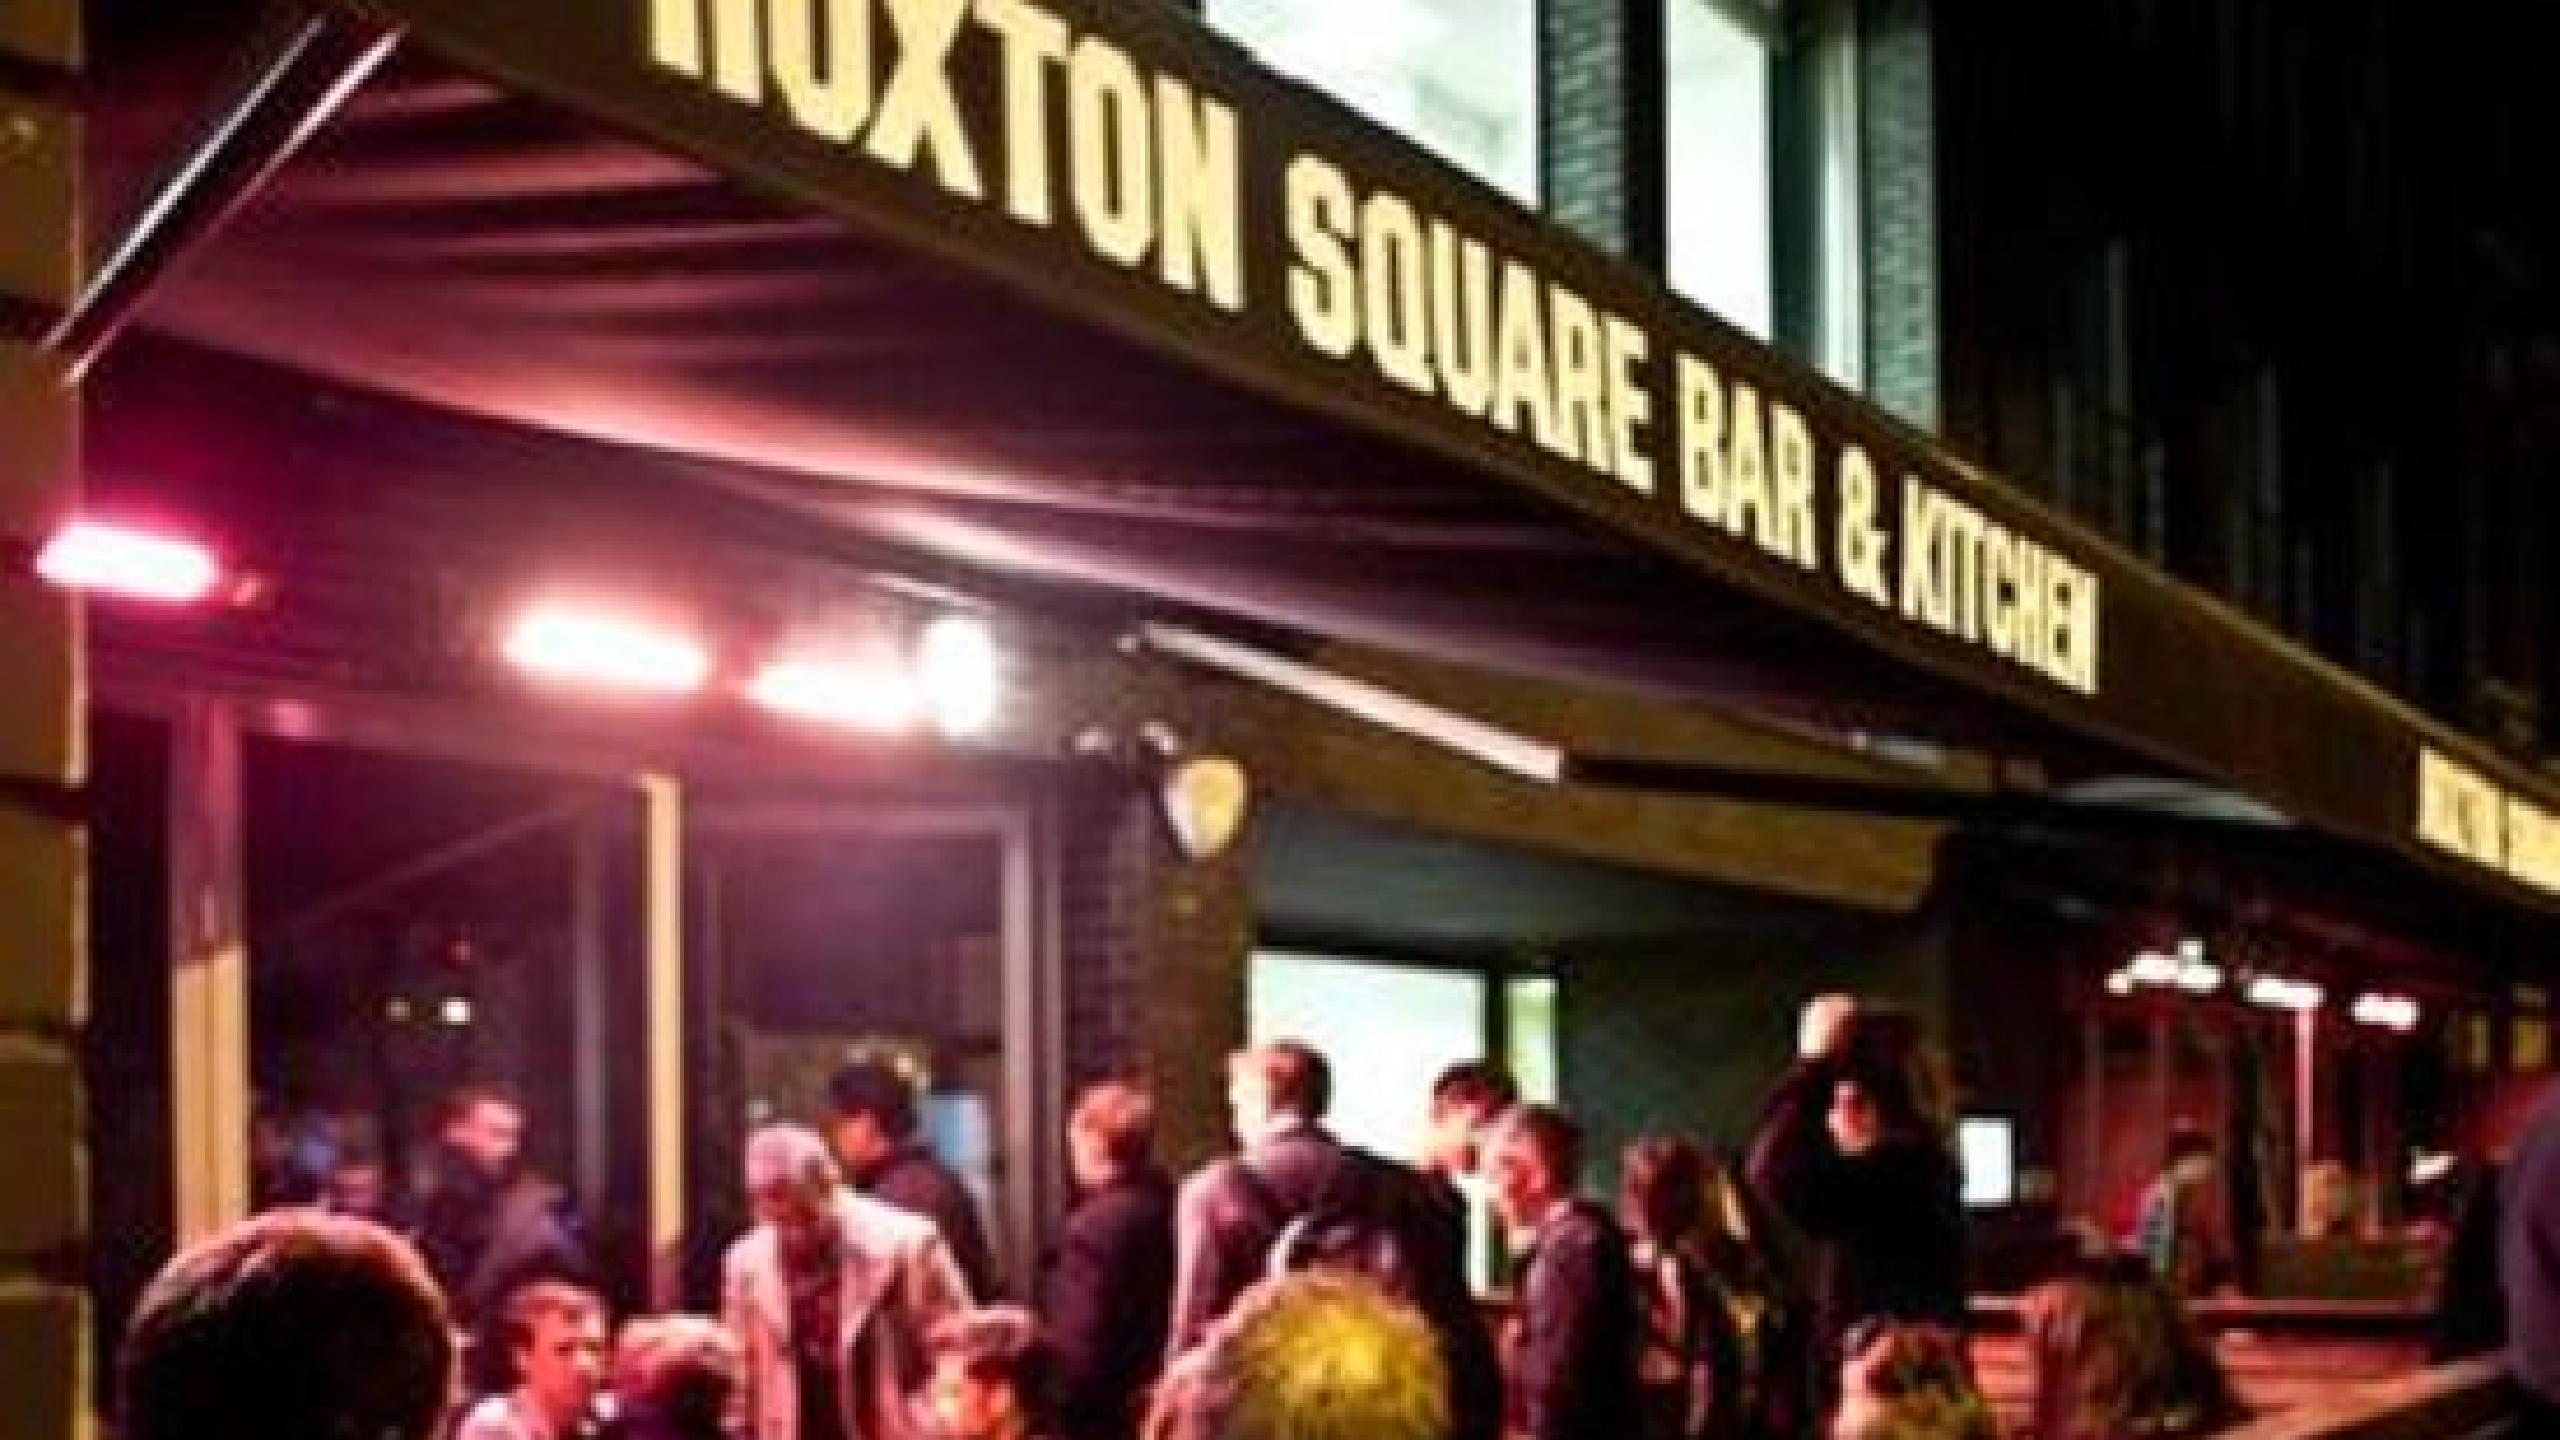 hoxton square bar and kitchen opening hours